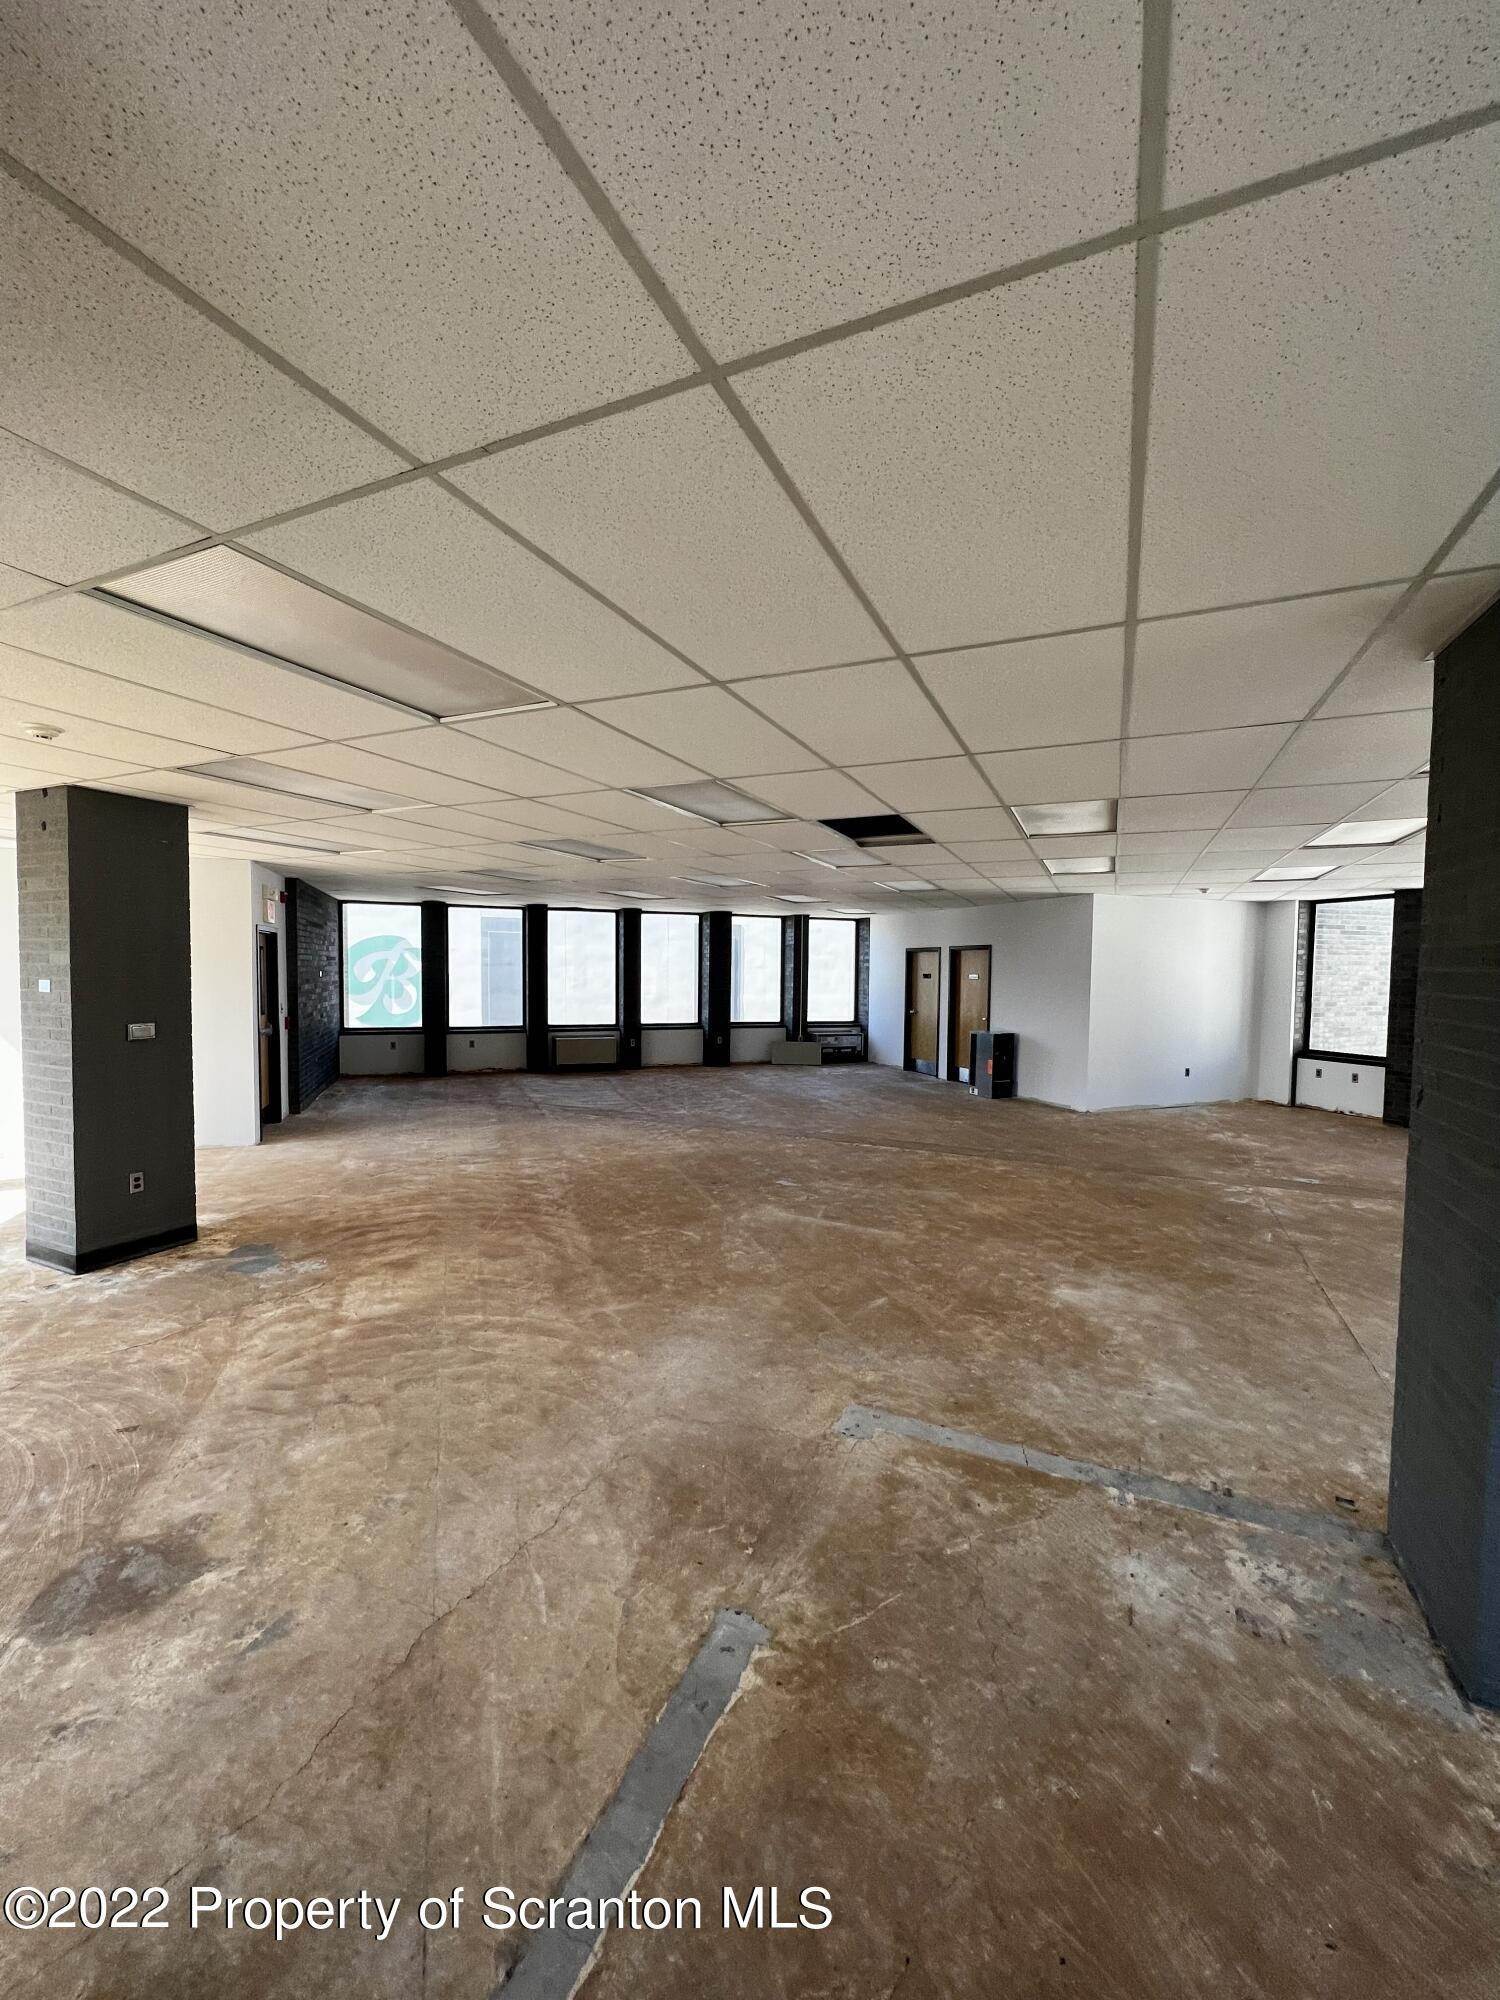 20. Commercial for Sale at 101 Wyoming Ave Scranton, Pennsylvania 18505 United States